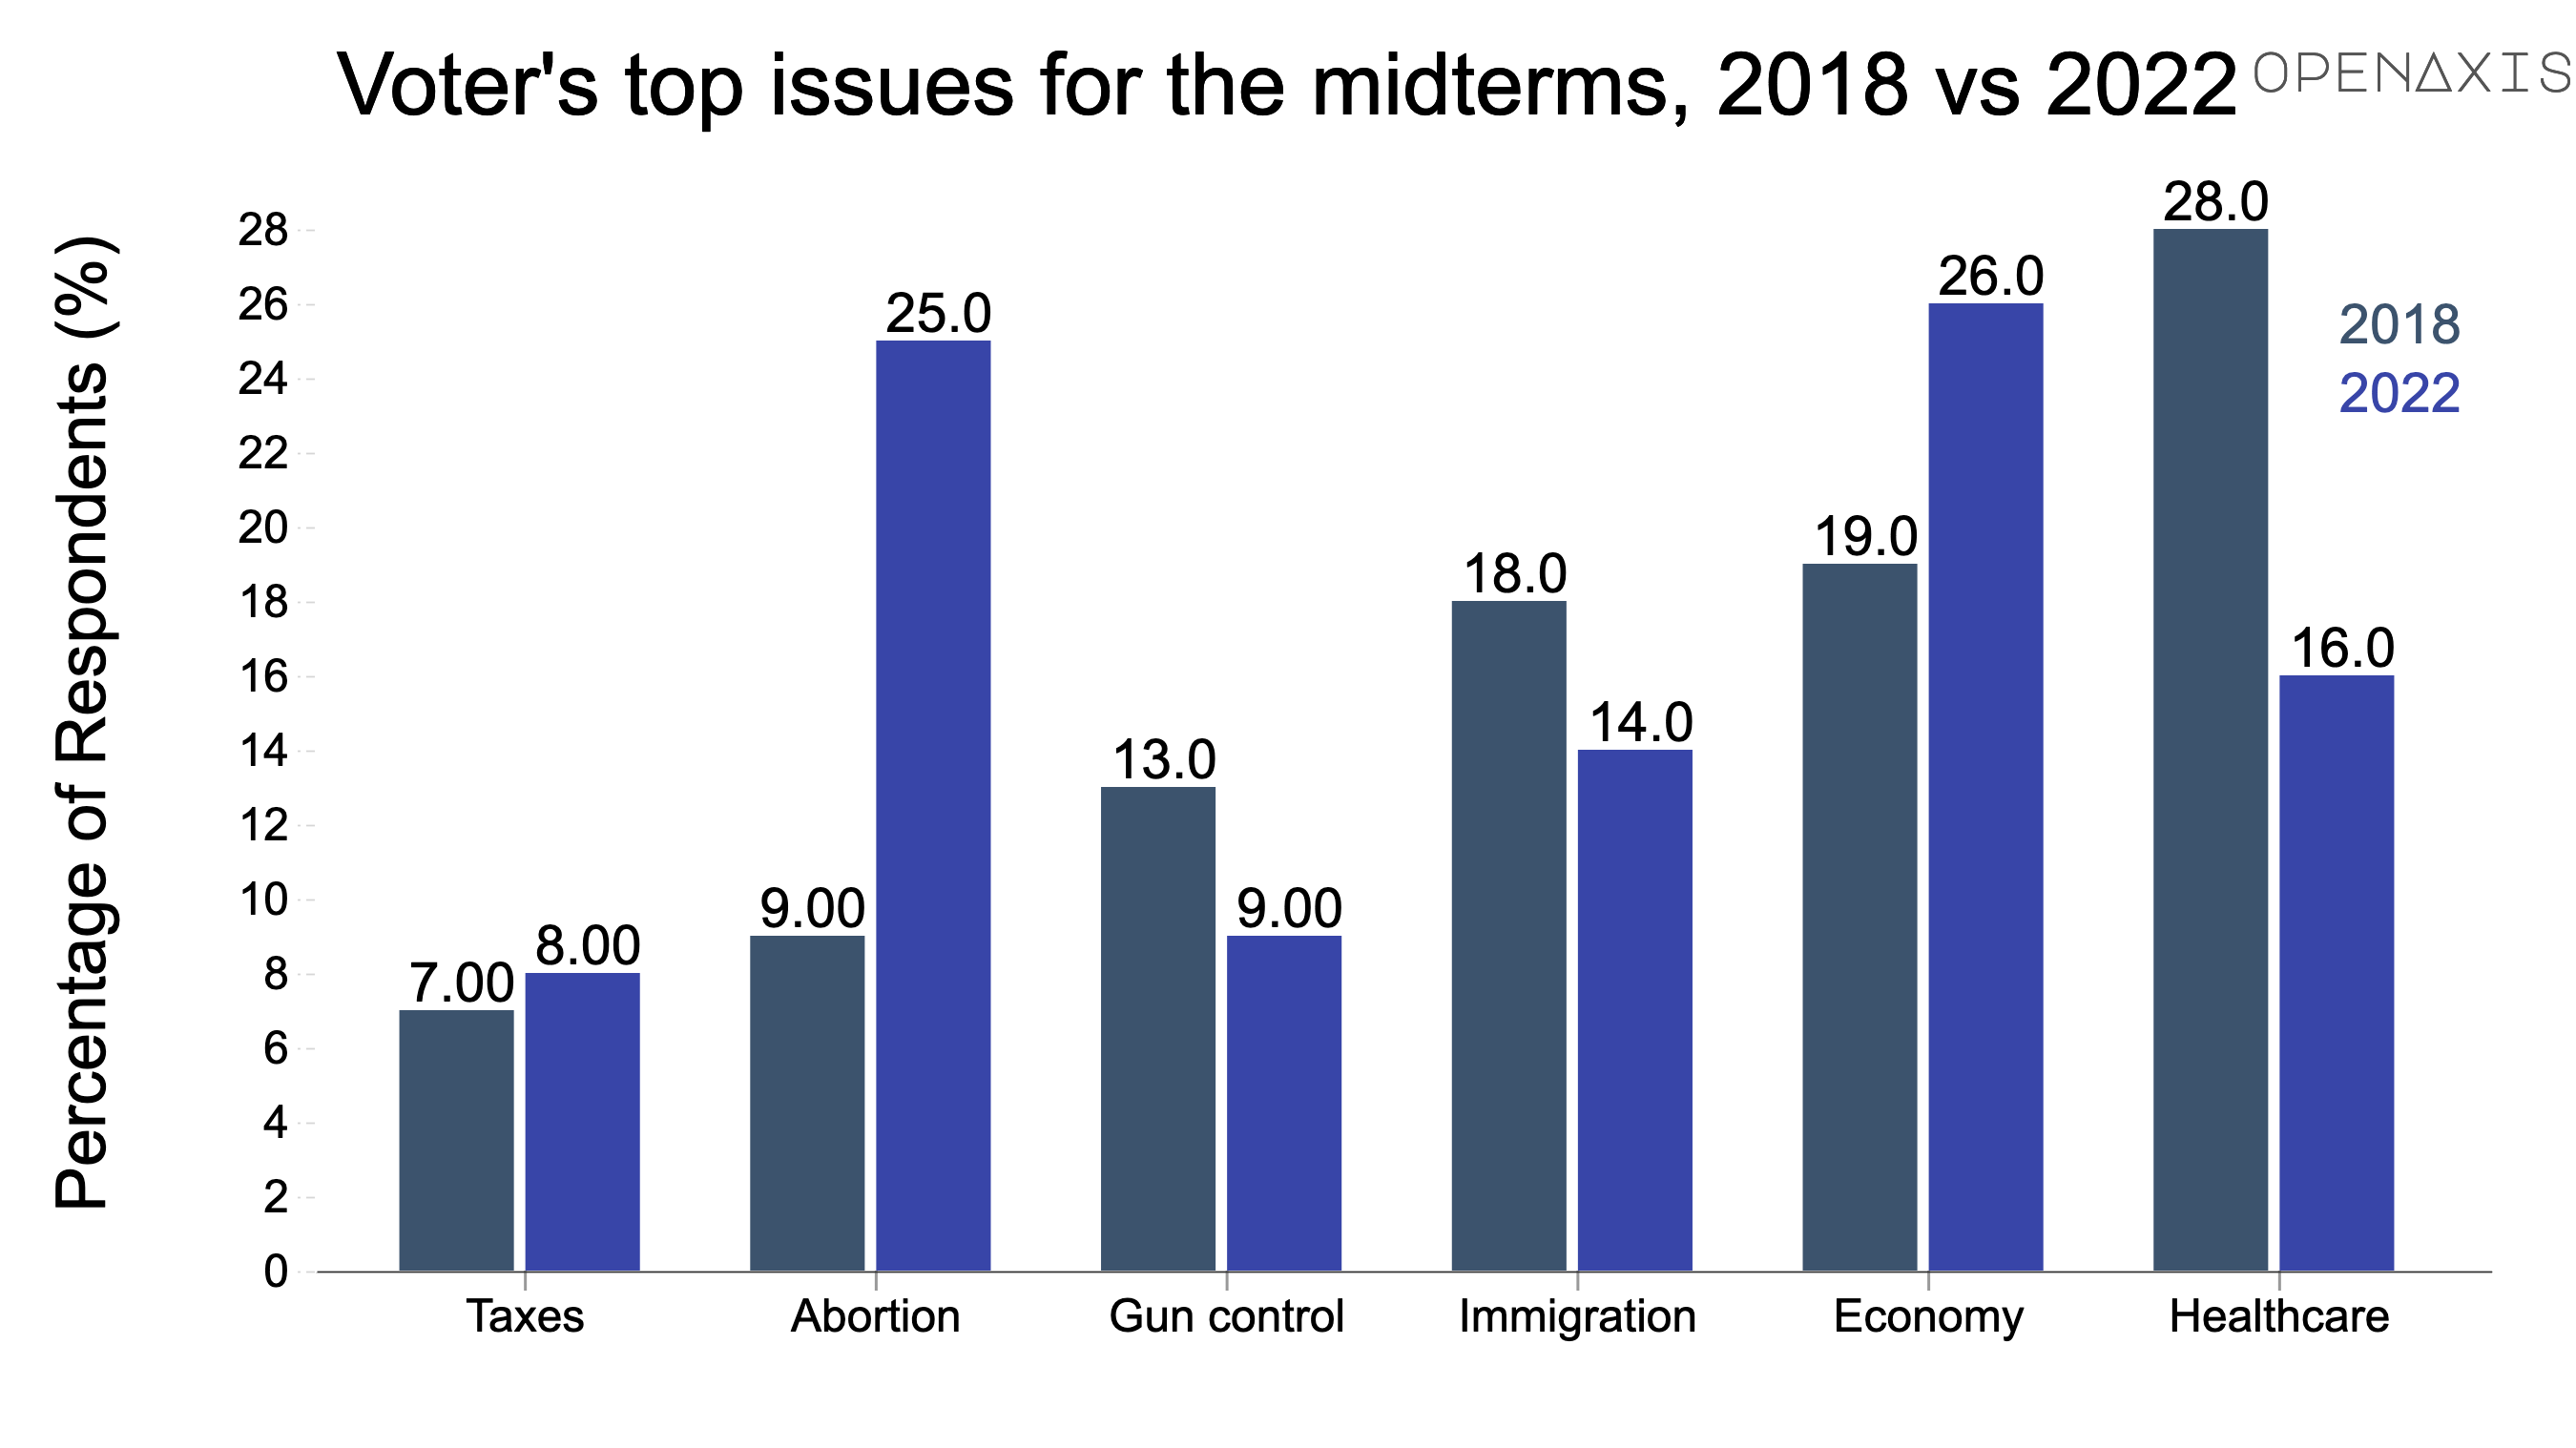 "Voter's top issues for the midterms, 2018 vs 2022"